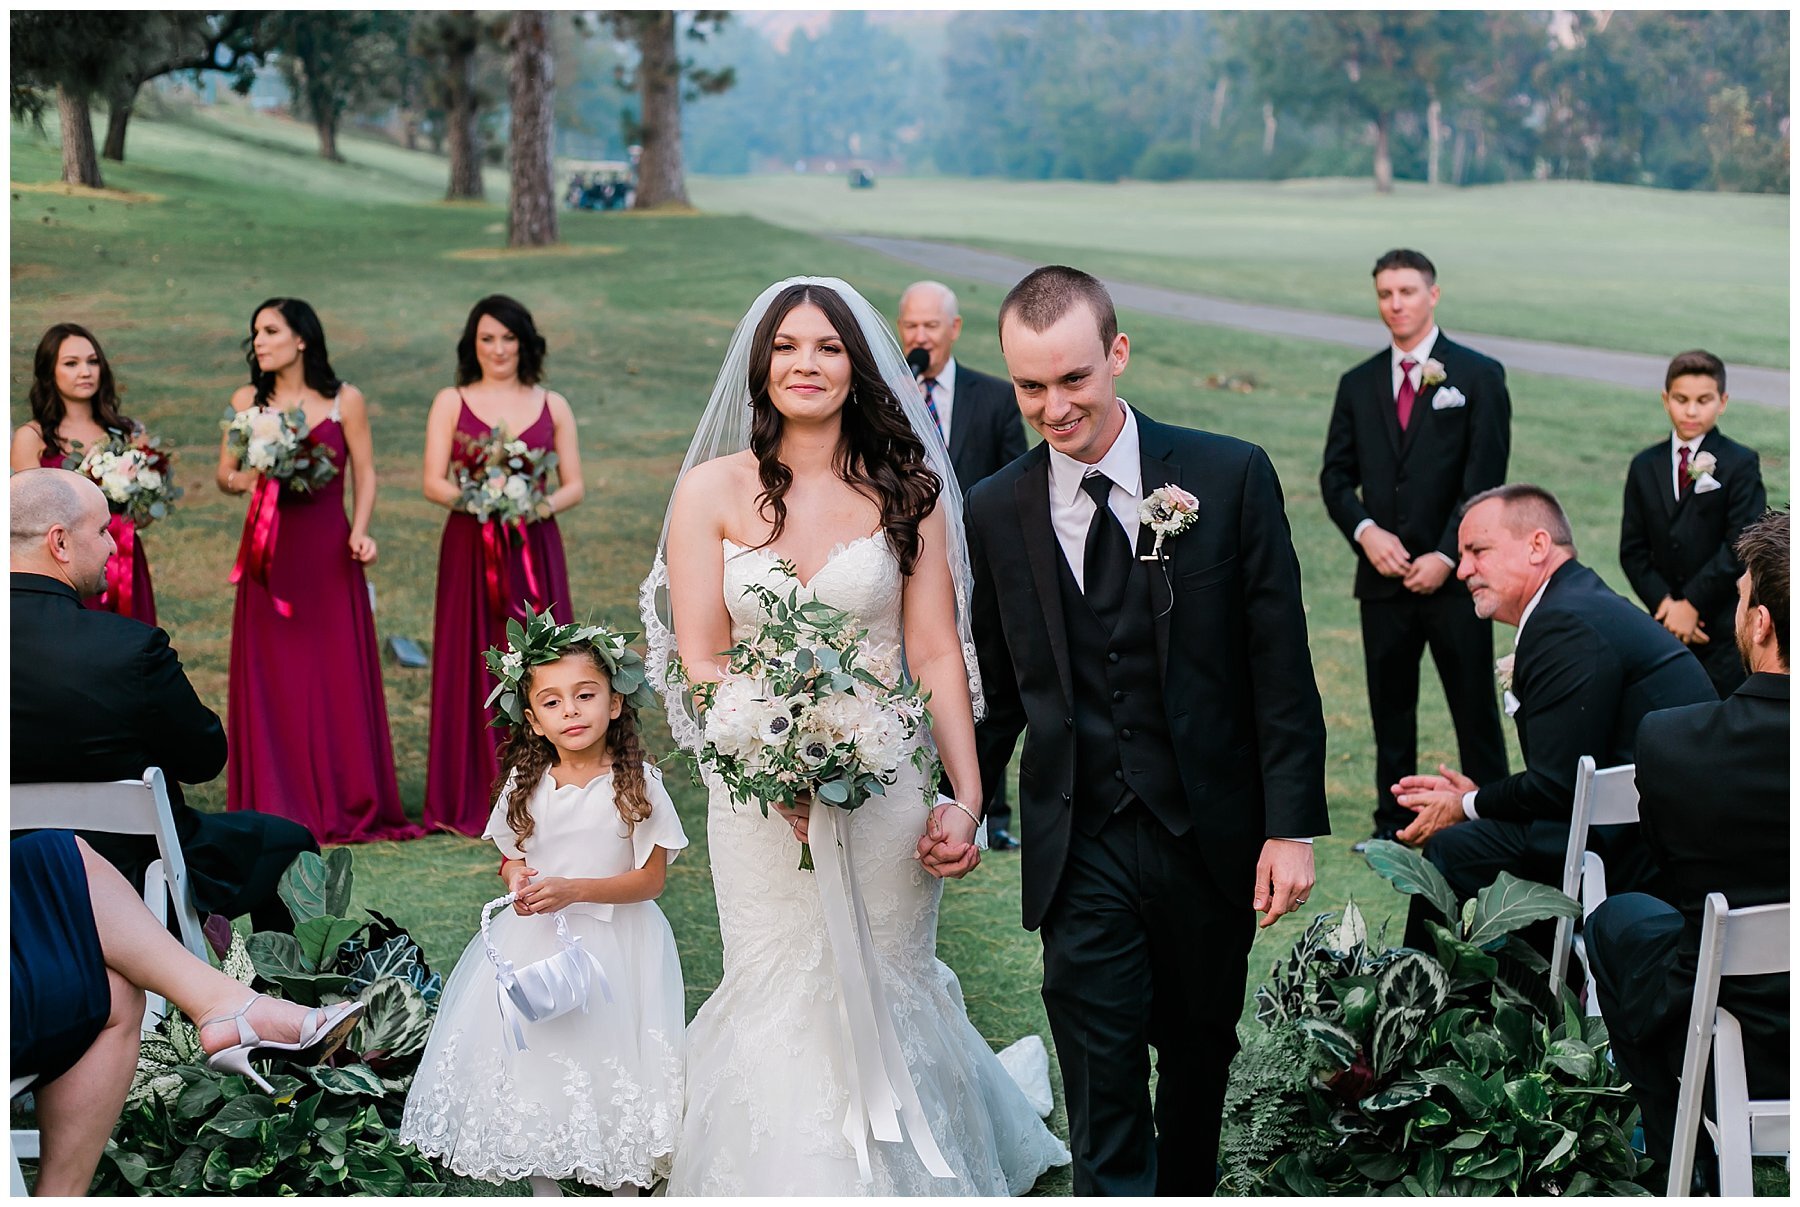  bride and groom walk down the aisle with the flower girl by their side 